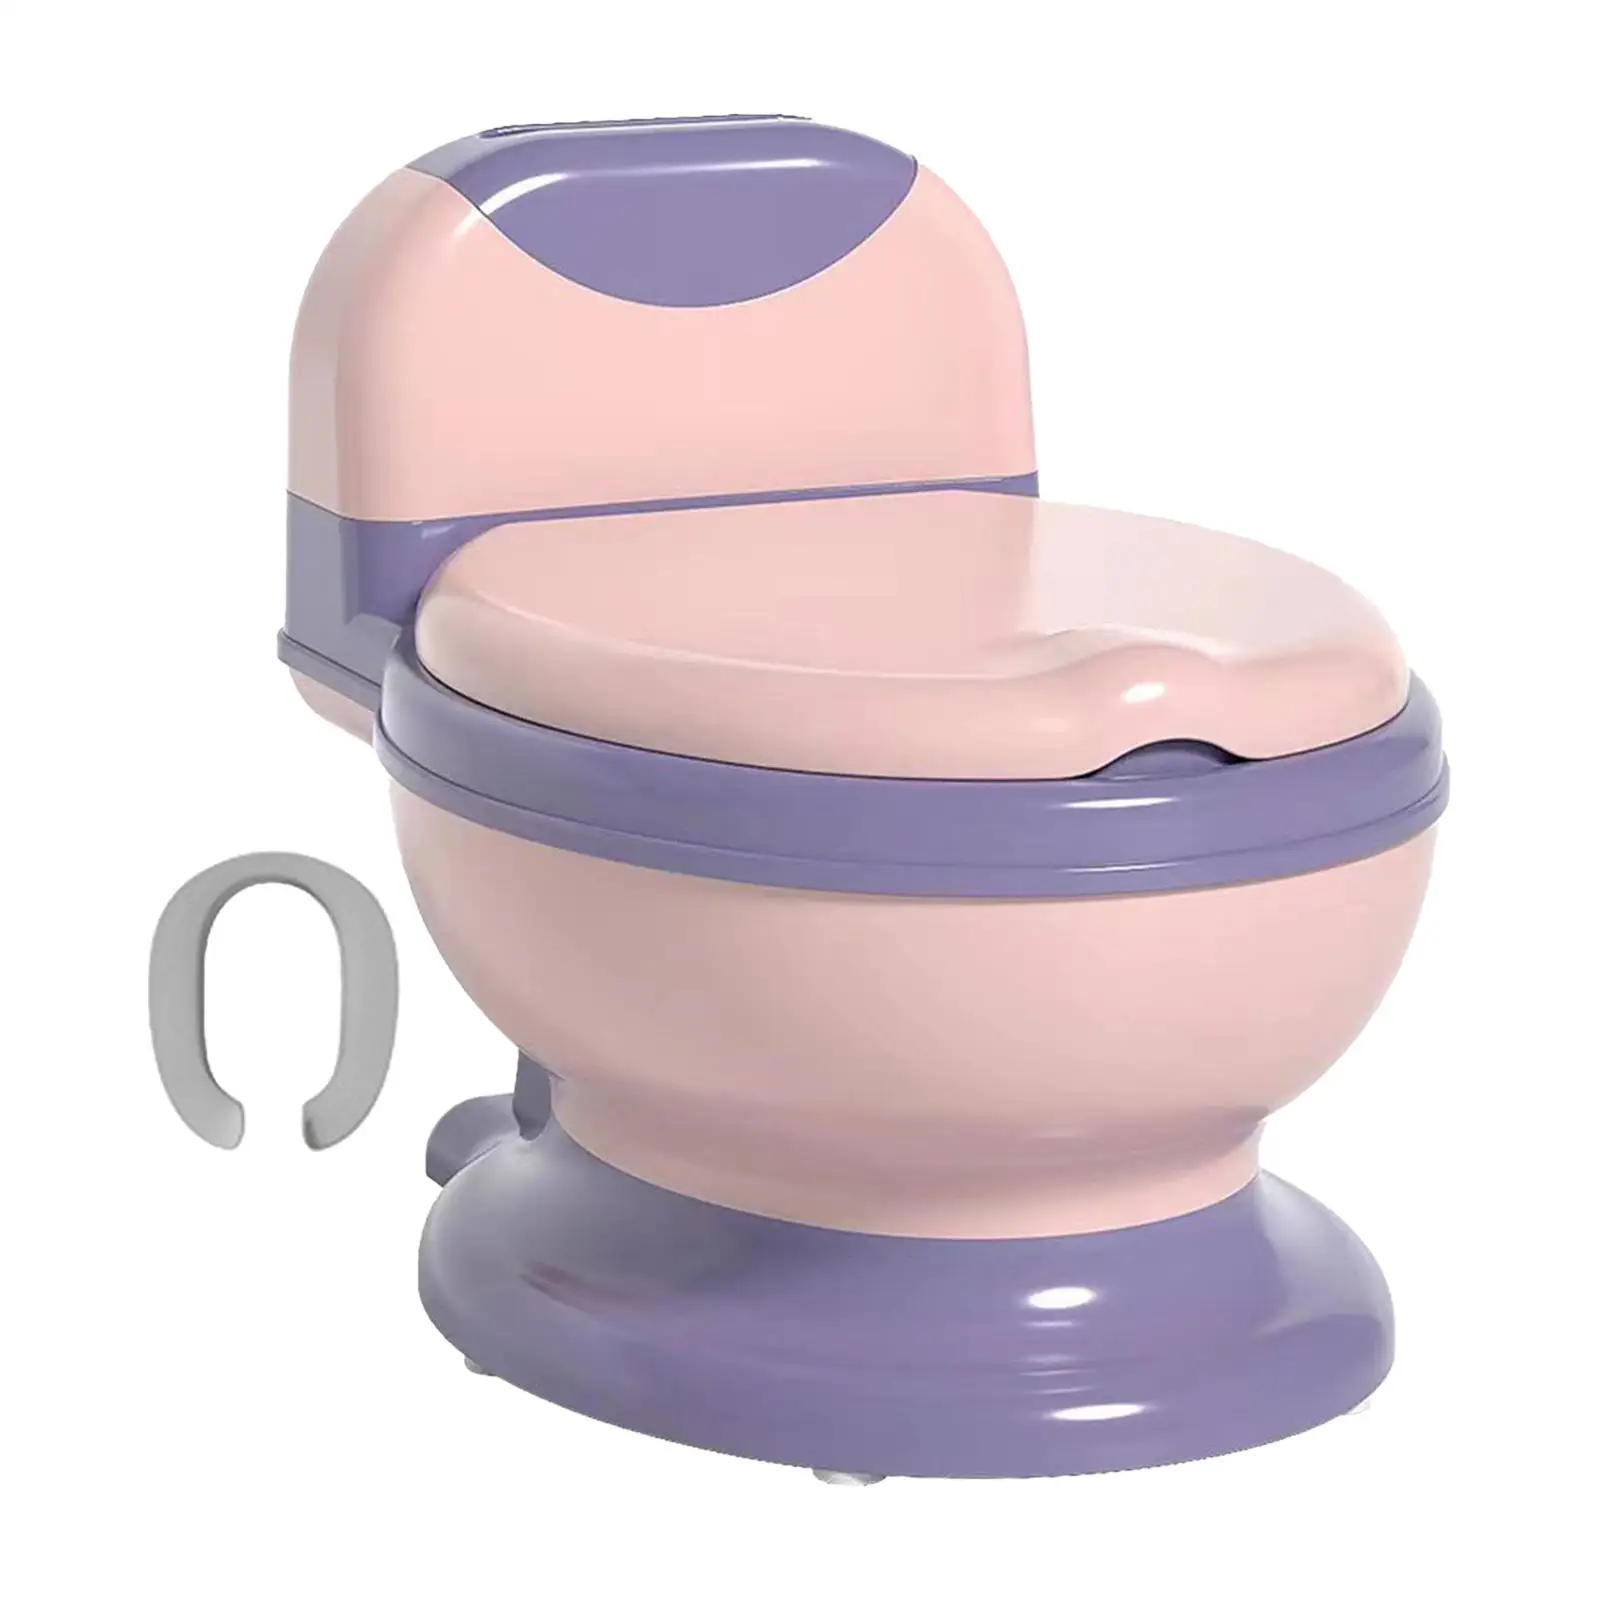 Potty Train Toilet Toilet Training Seat Potty Seat Removable Potty Pot Toddlers Potty Chair for Girls Baby Toddlers Boys Kids